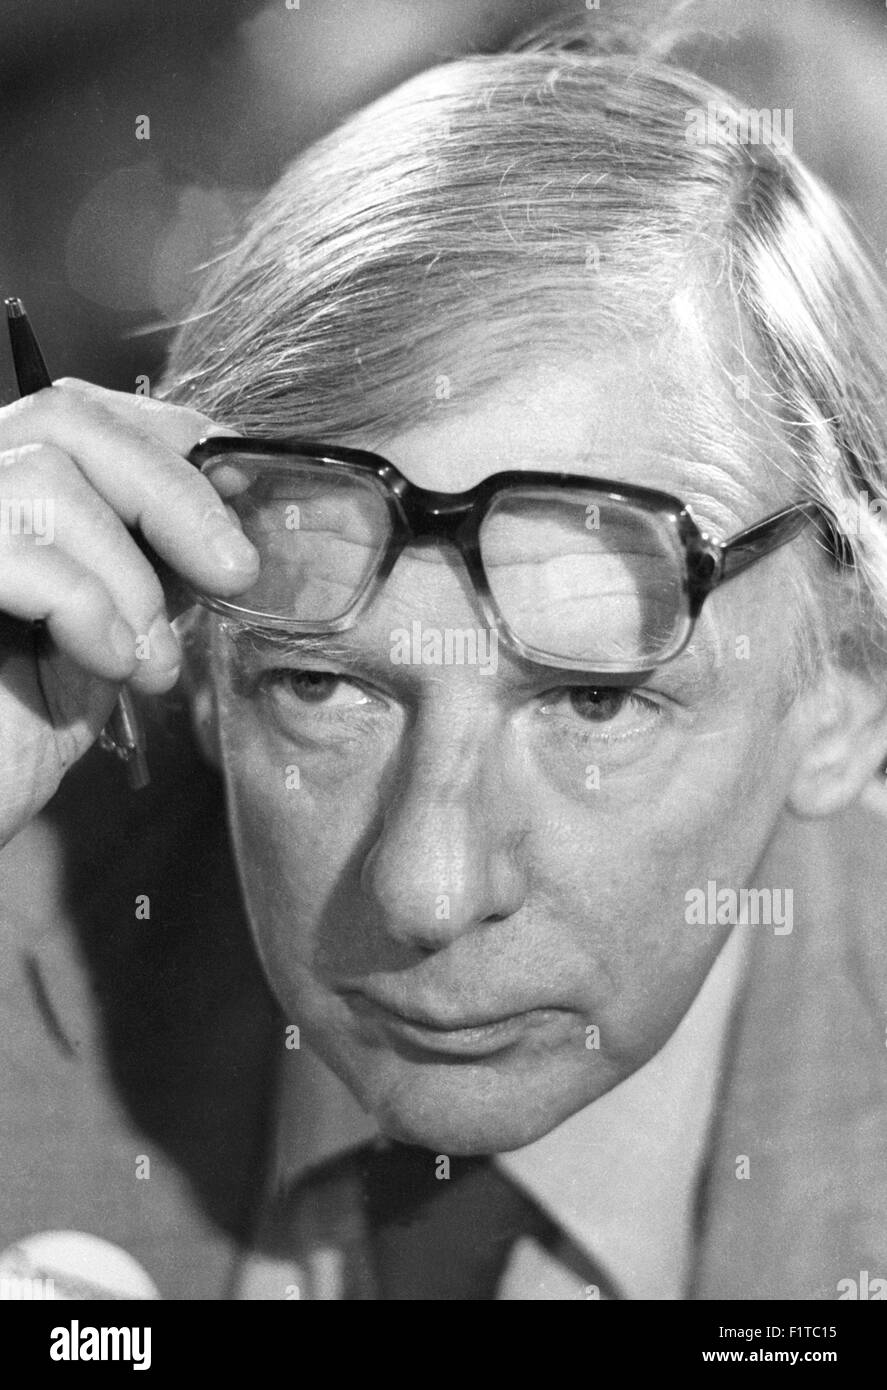 Peter David Shore, Baron Shore of Stepney PC (20 May 1924 Ð 24 September 2001) was a British Labour politician and former Cabinet Minister. Image 1984 by David Cole from archives of Press Portrait Service Stock Photo